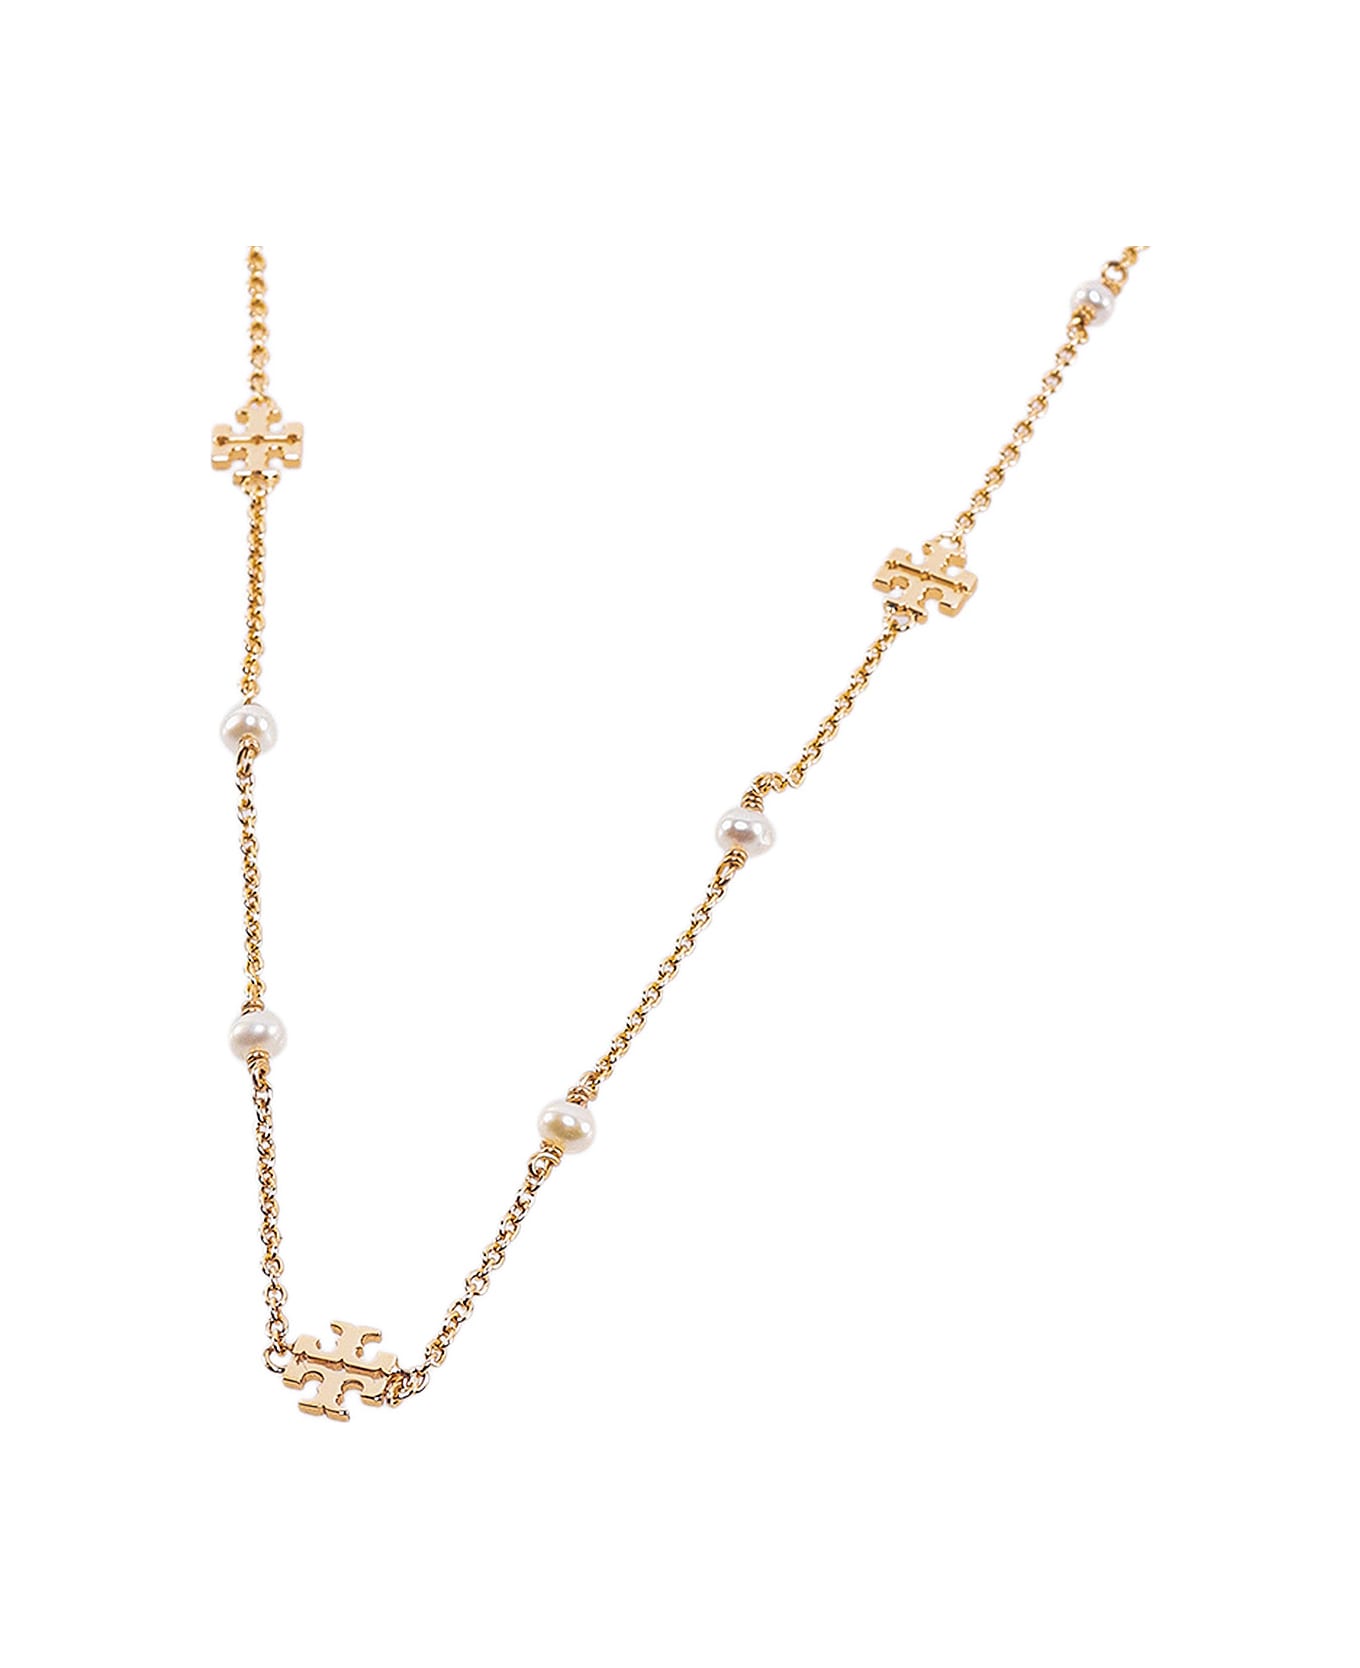 Tory Burch Necklace - Gold